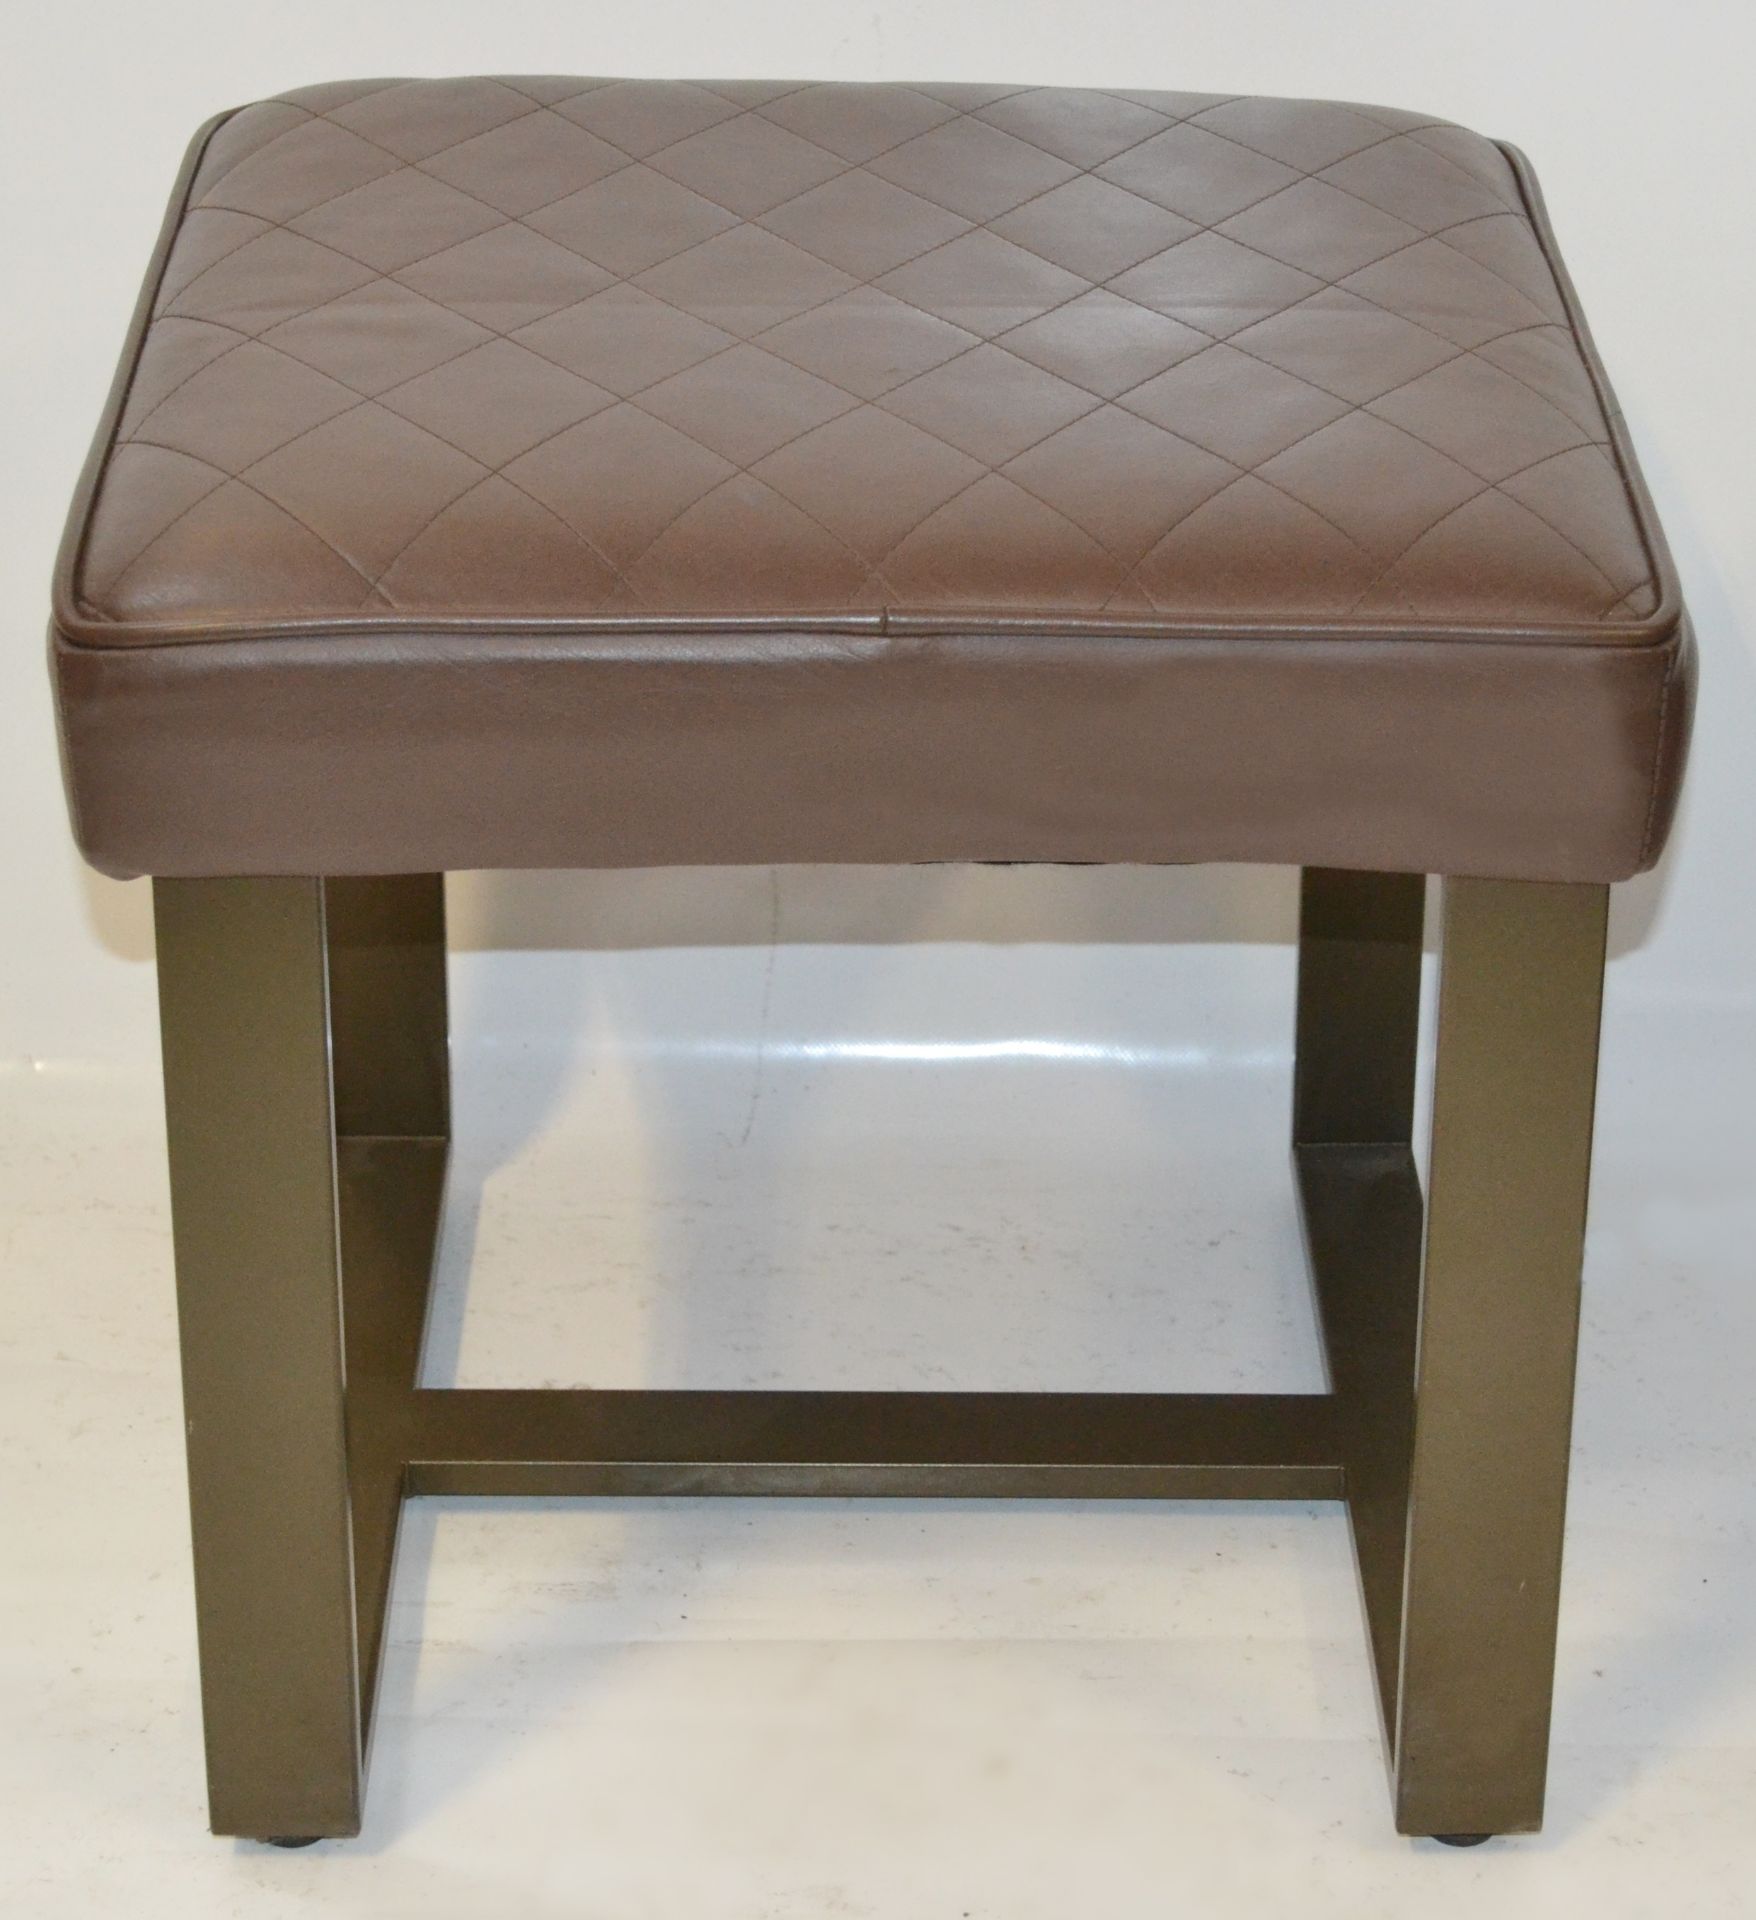 Pair Of Upholstered Stools In A Brown Faux Leather - Recently Removed From A Major UK Store In - Image 4 of 5